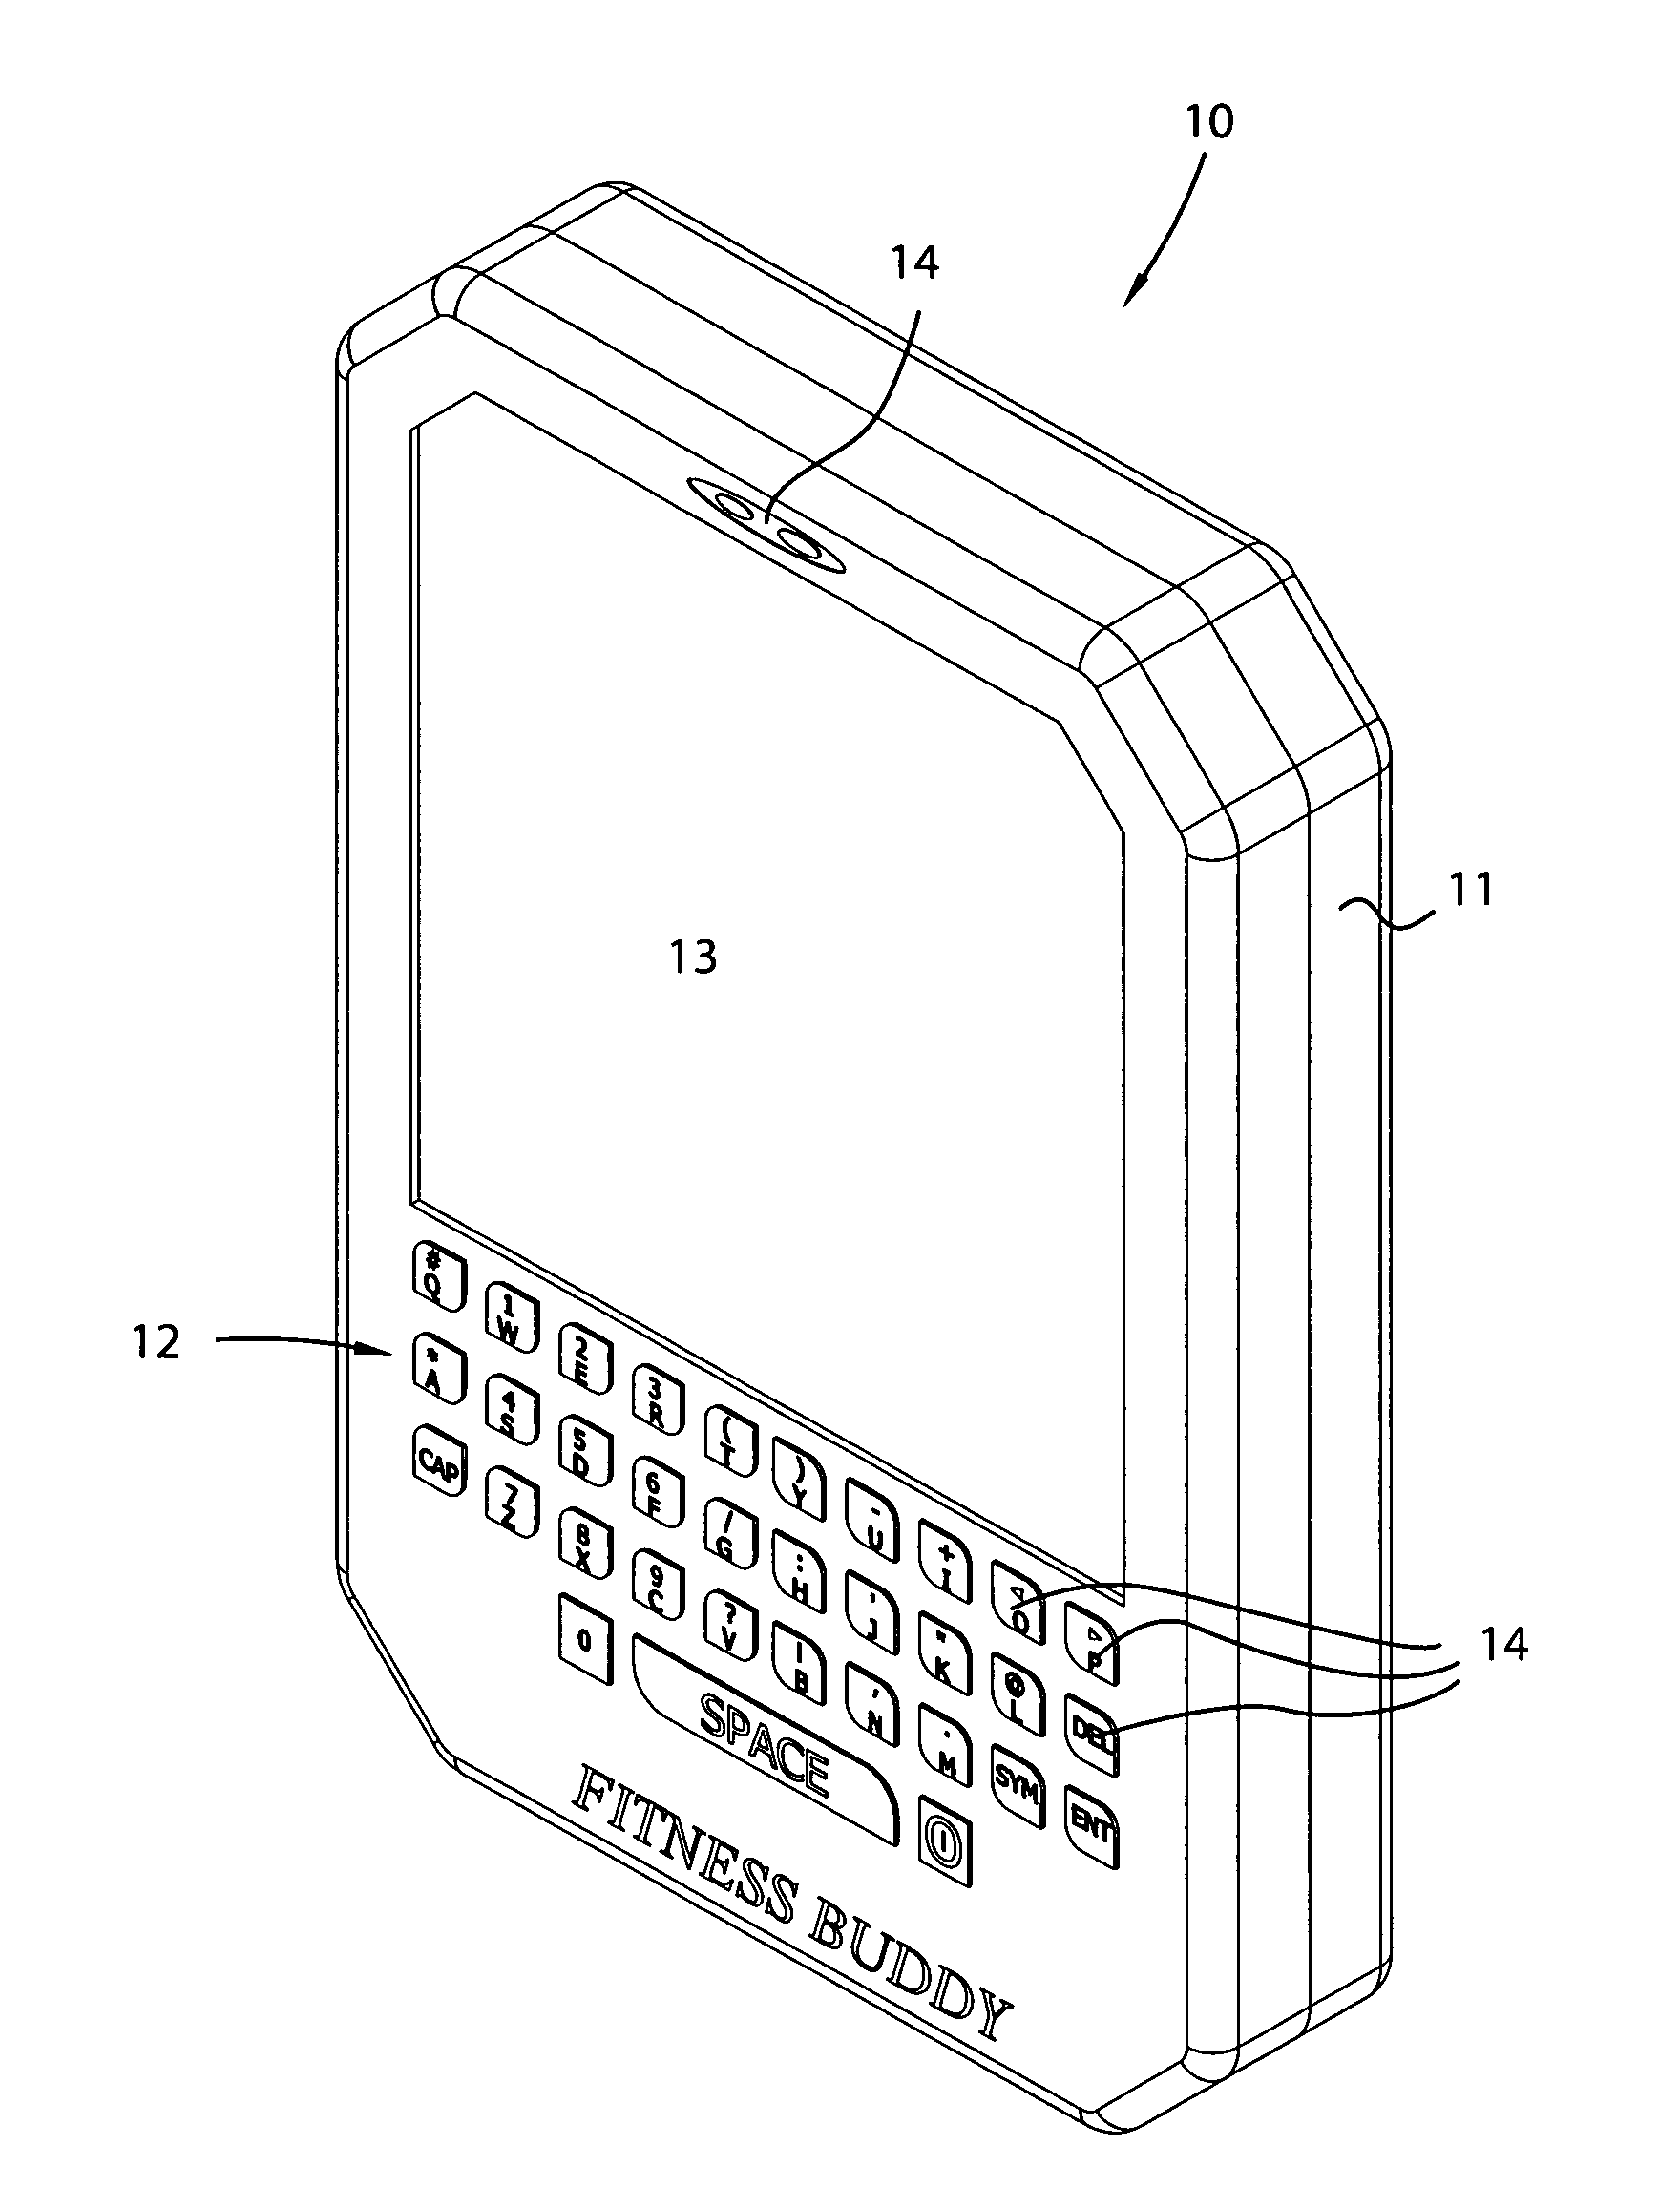 Device, method and computer program product for tracking and monitoring an exercise regimen